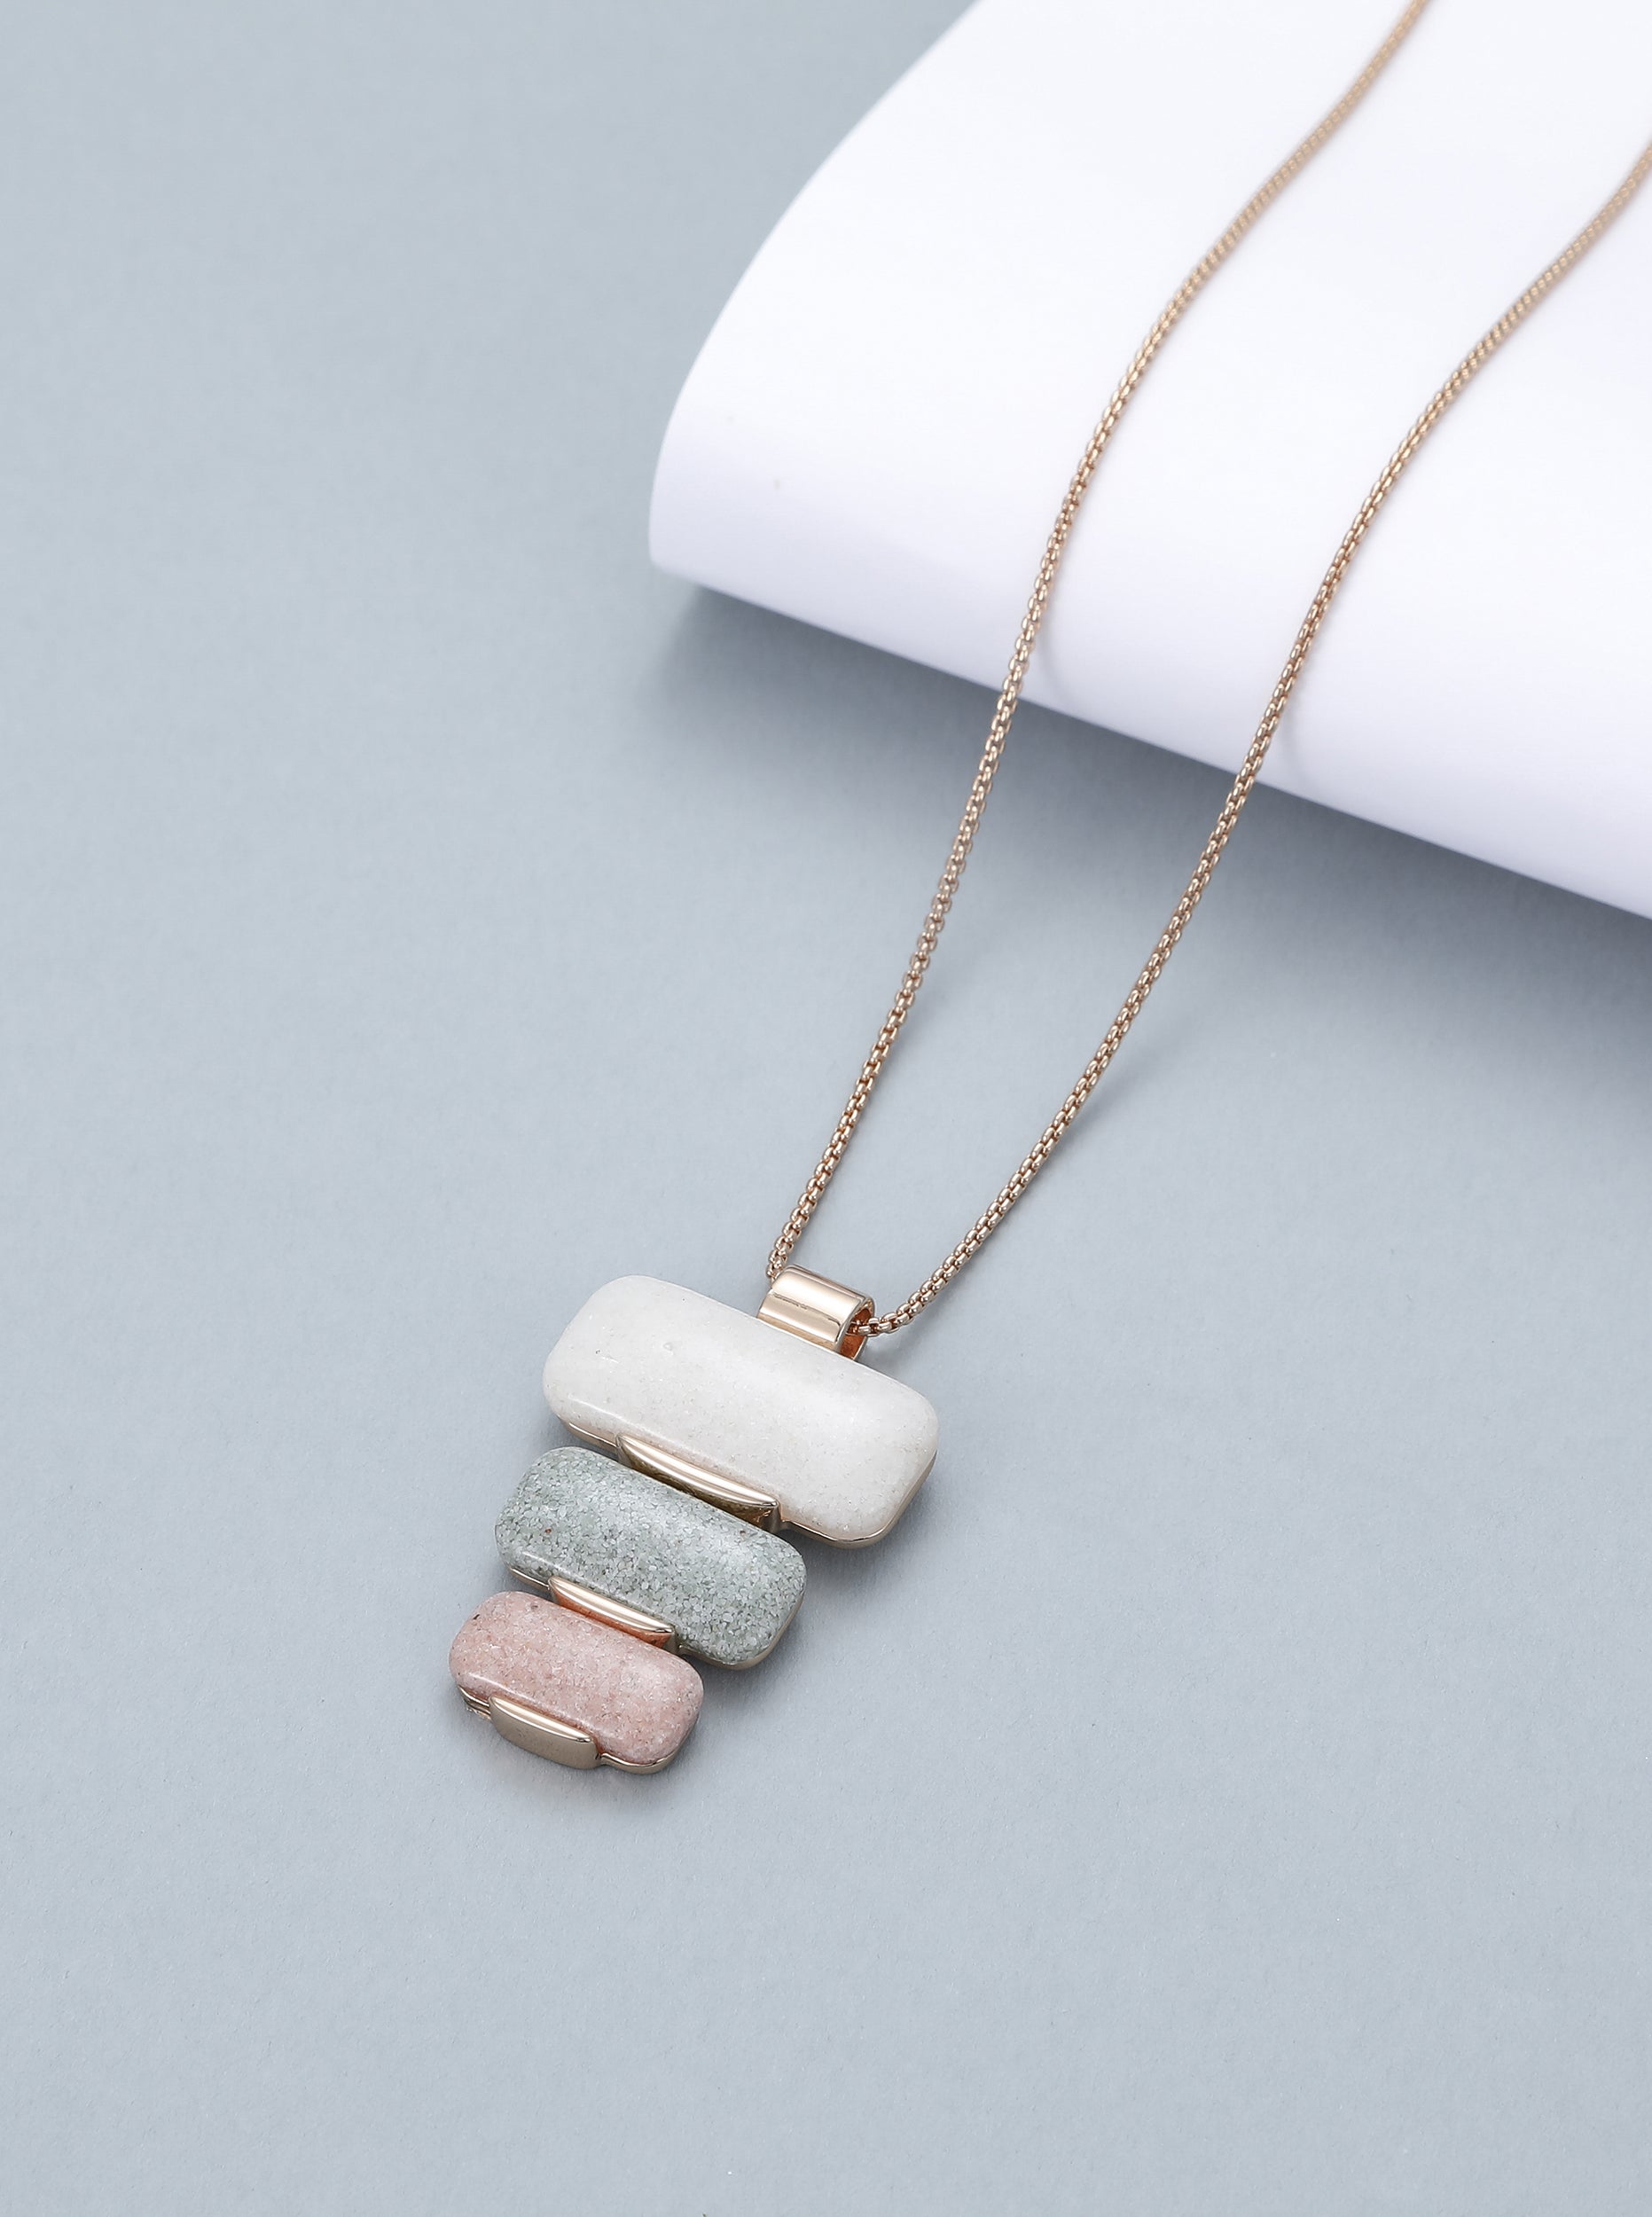 Short necklace with rose gold chain, rose pink, sage and natural oblong stations